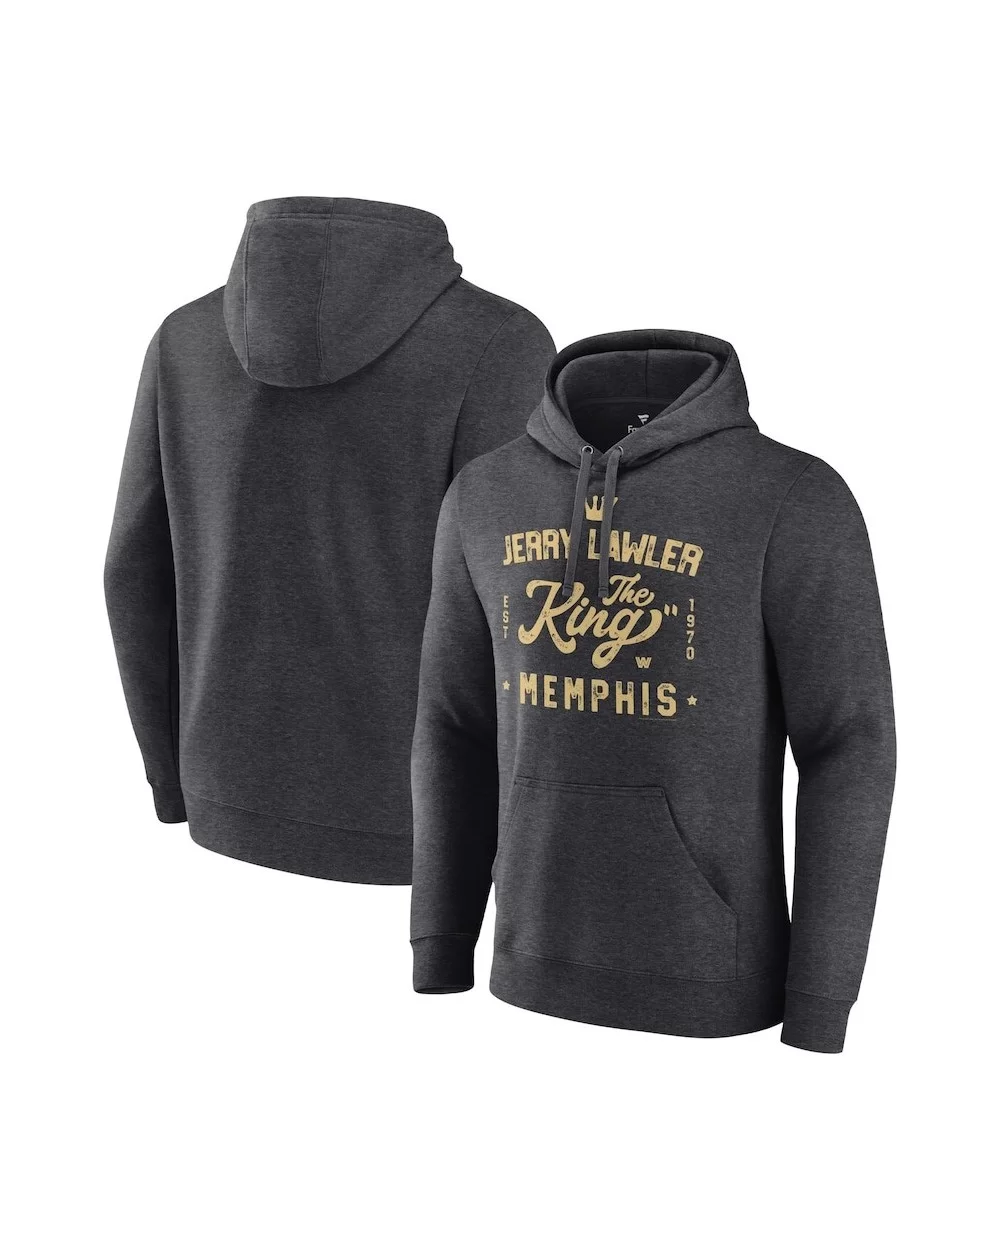 Men's Fanatics Branded Charcoal Jerry Lawler King of Memphis Pullover Hoodie $19.60 Apparel